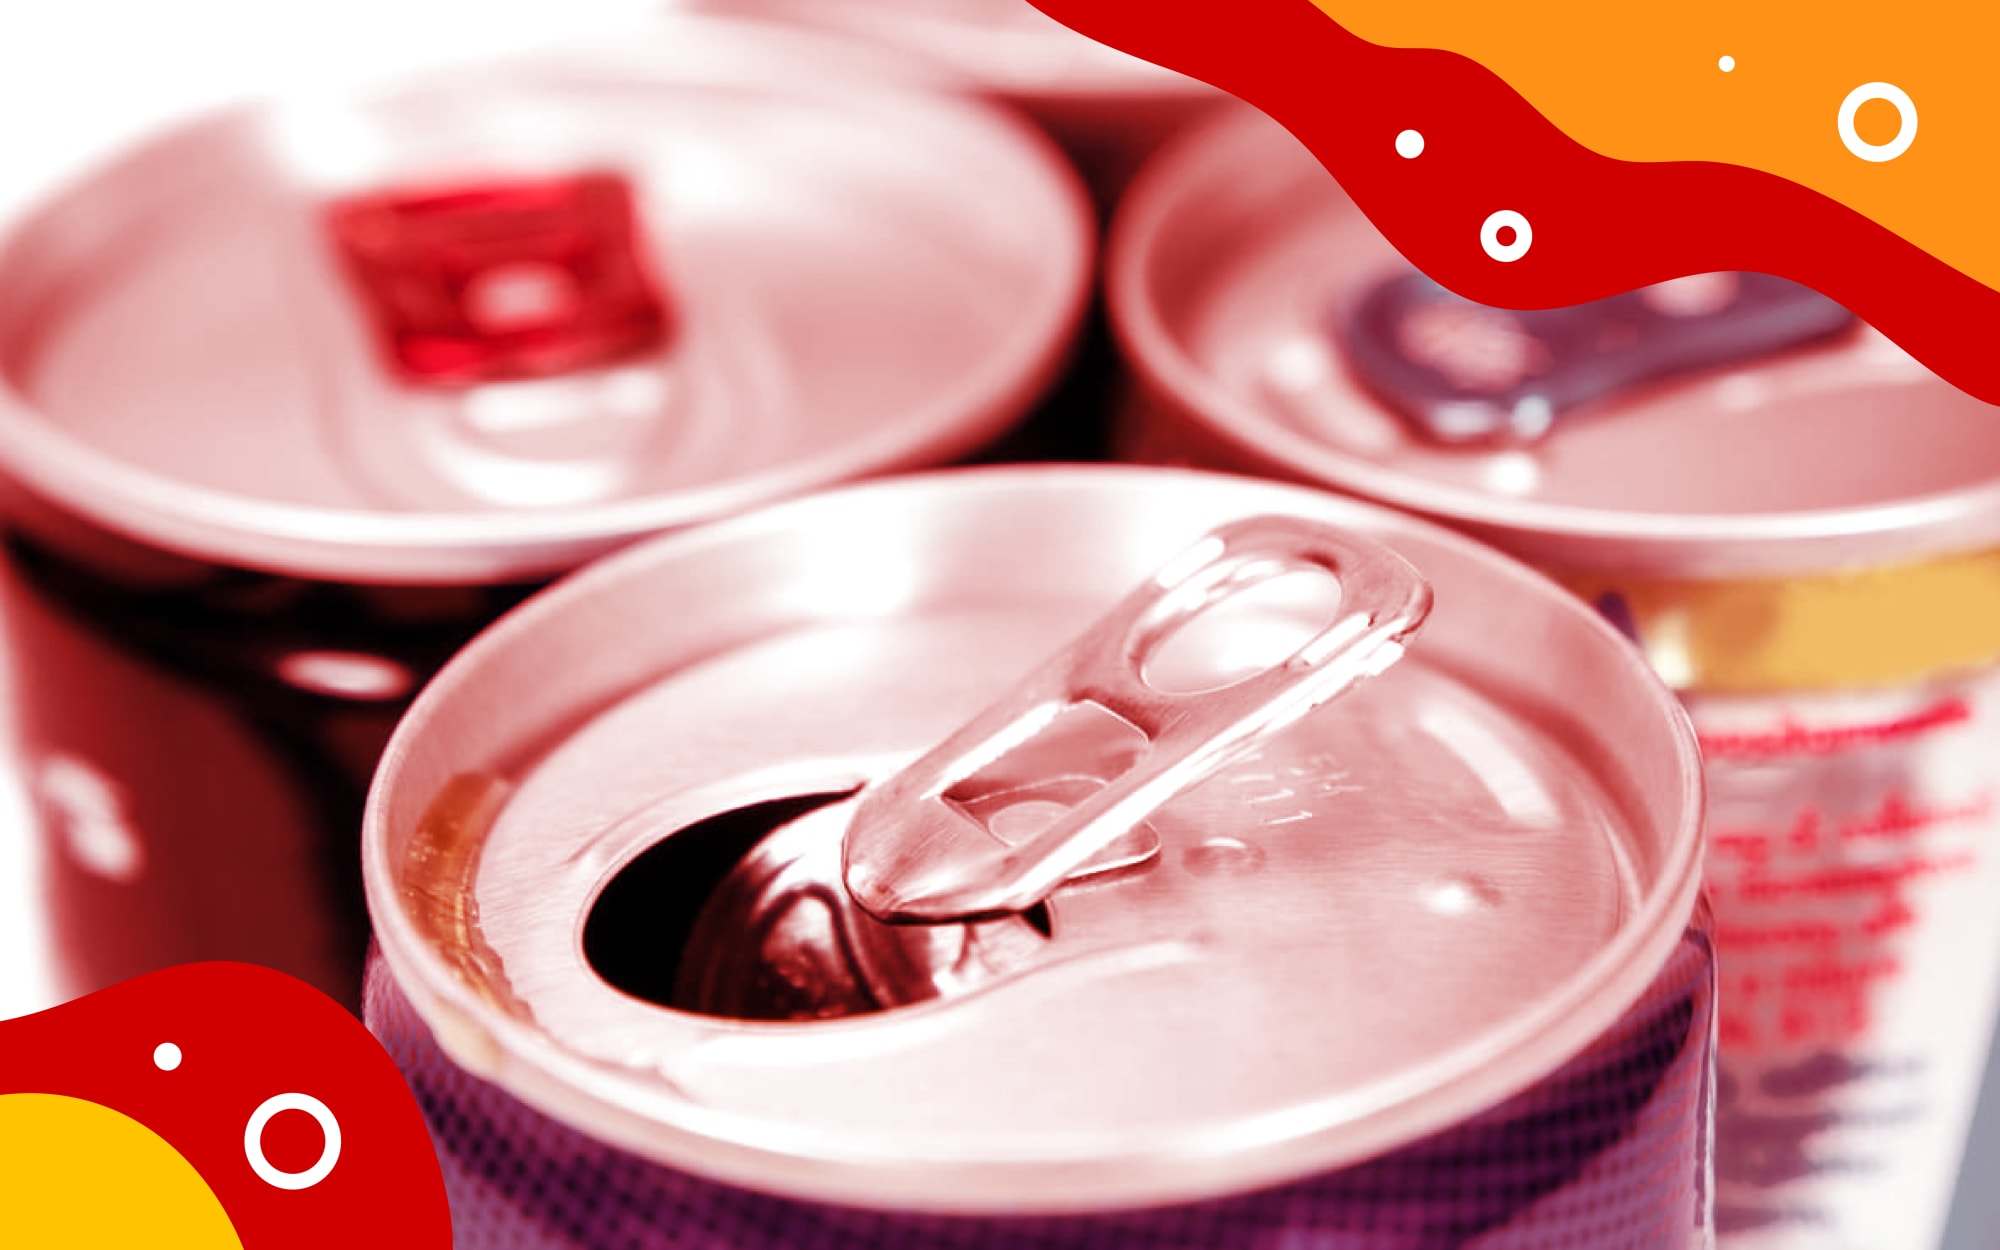 Cans of sugary drinks with stylised red and yellow border